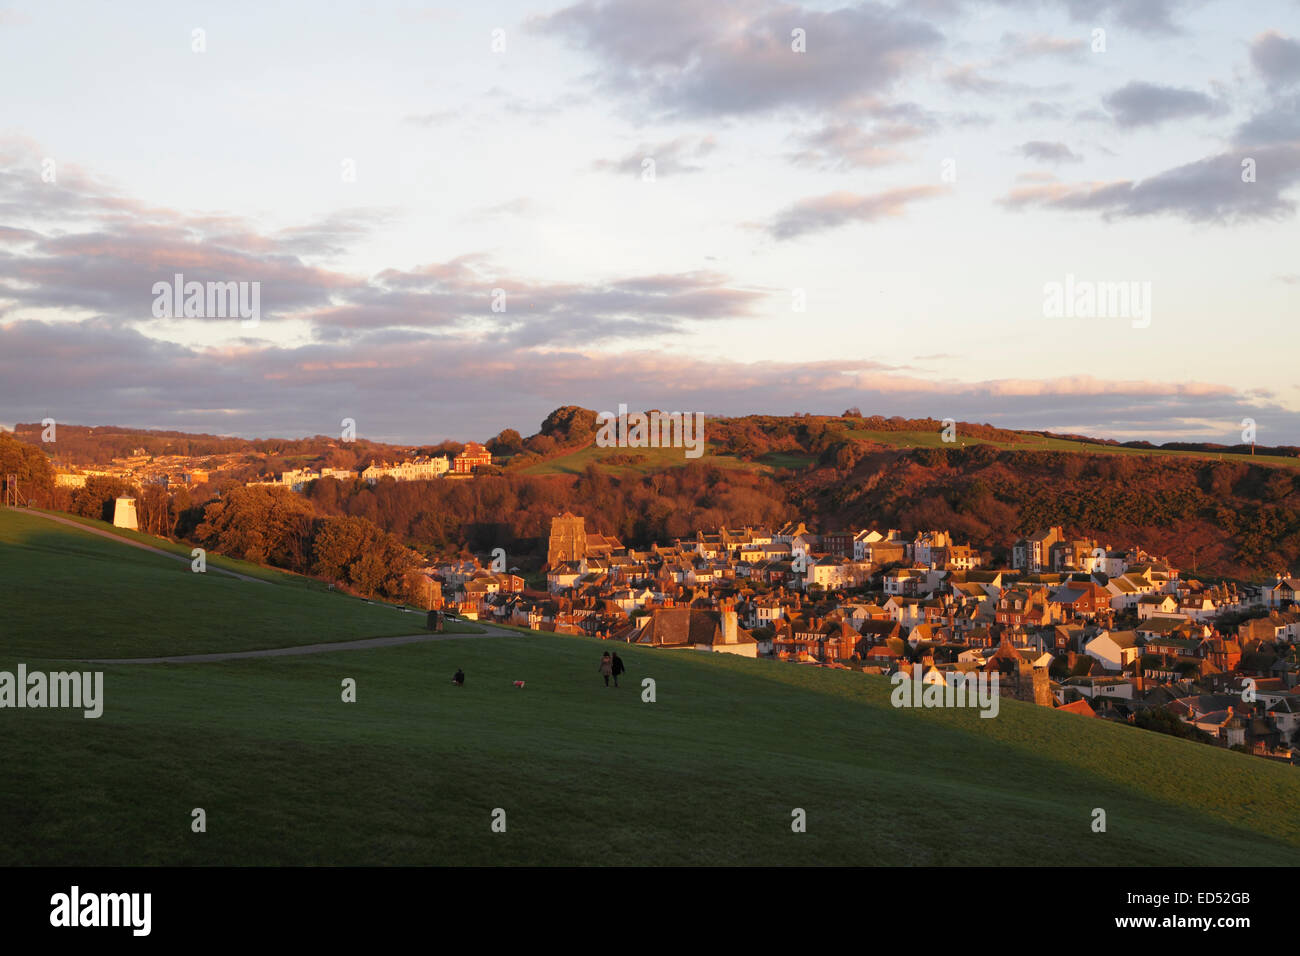 View of Hastings Old Town nestling in the valley at sunset on Christmas Eve 2014 England Stock Photo